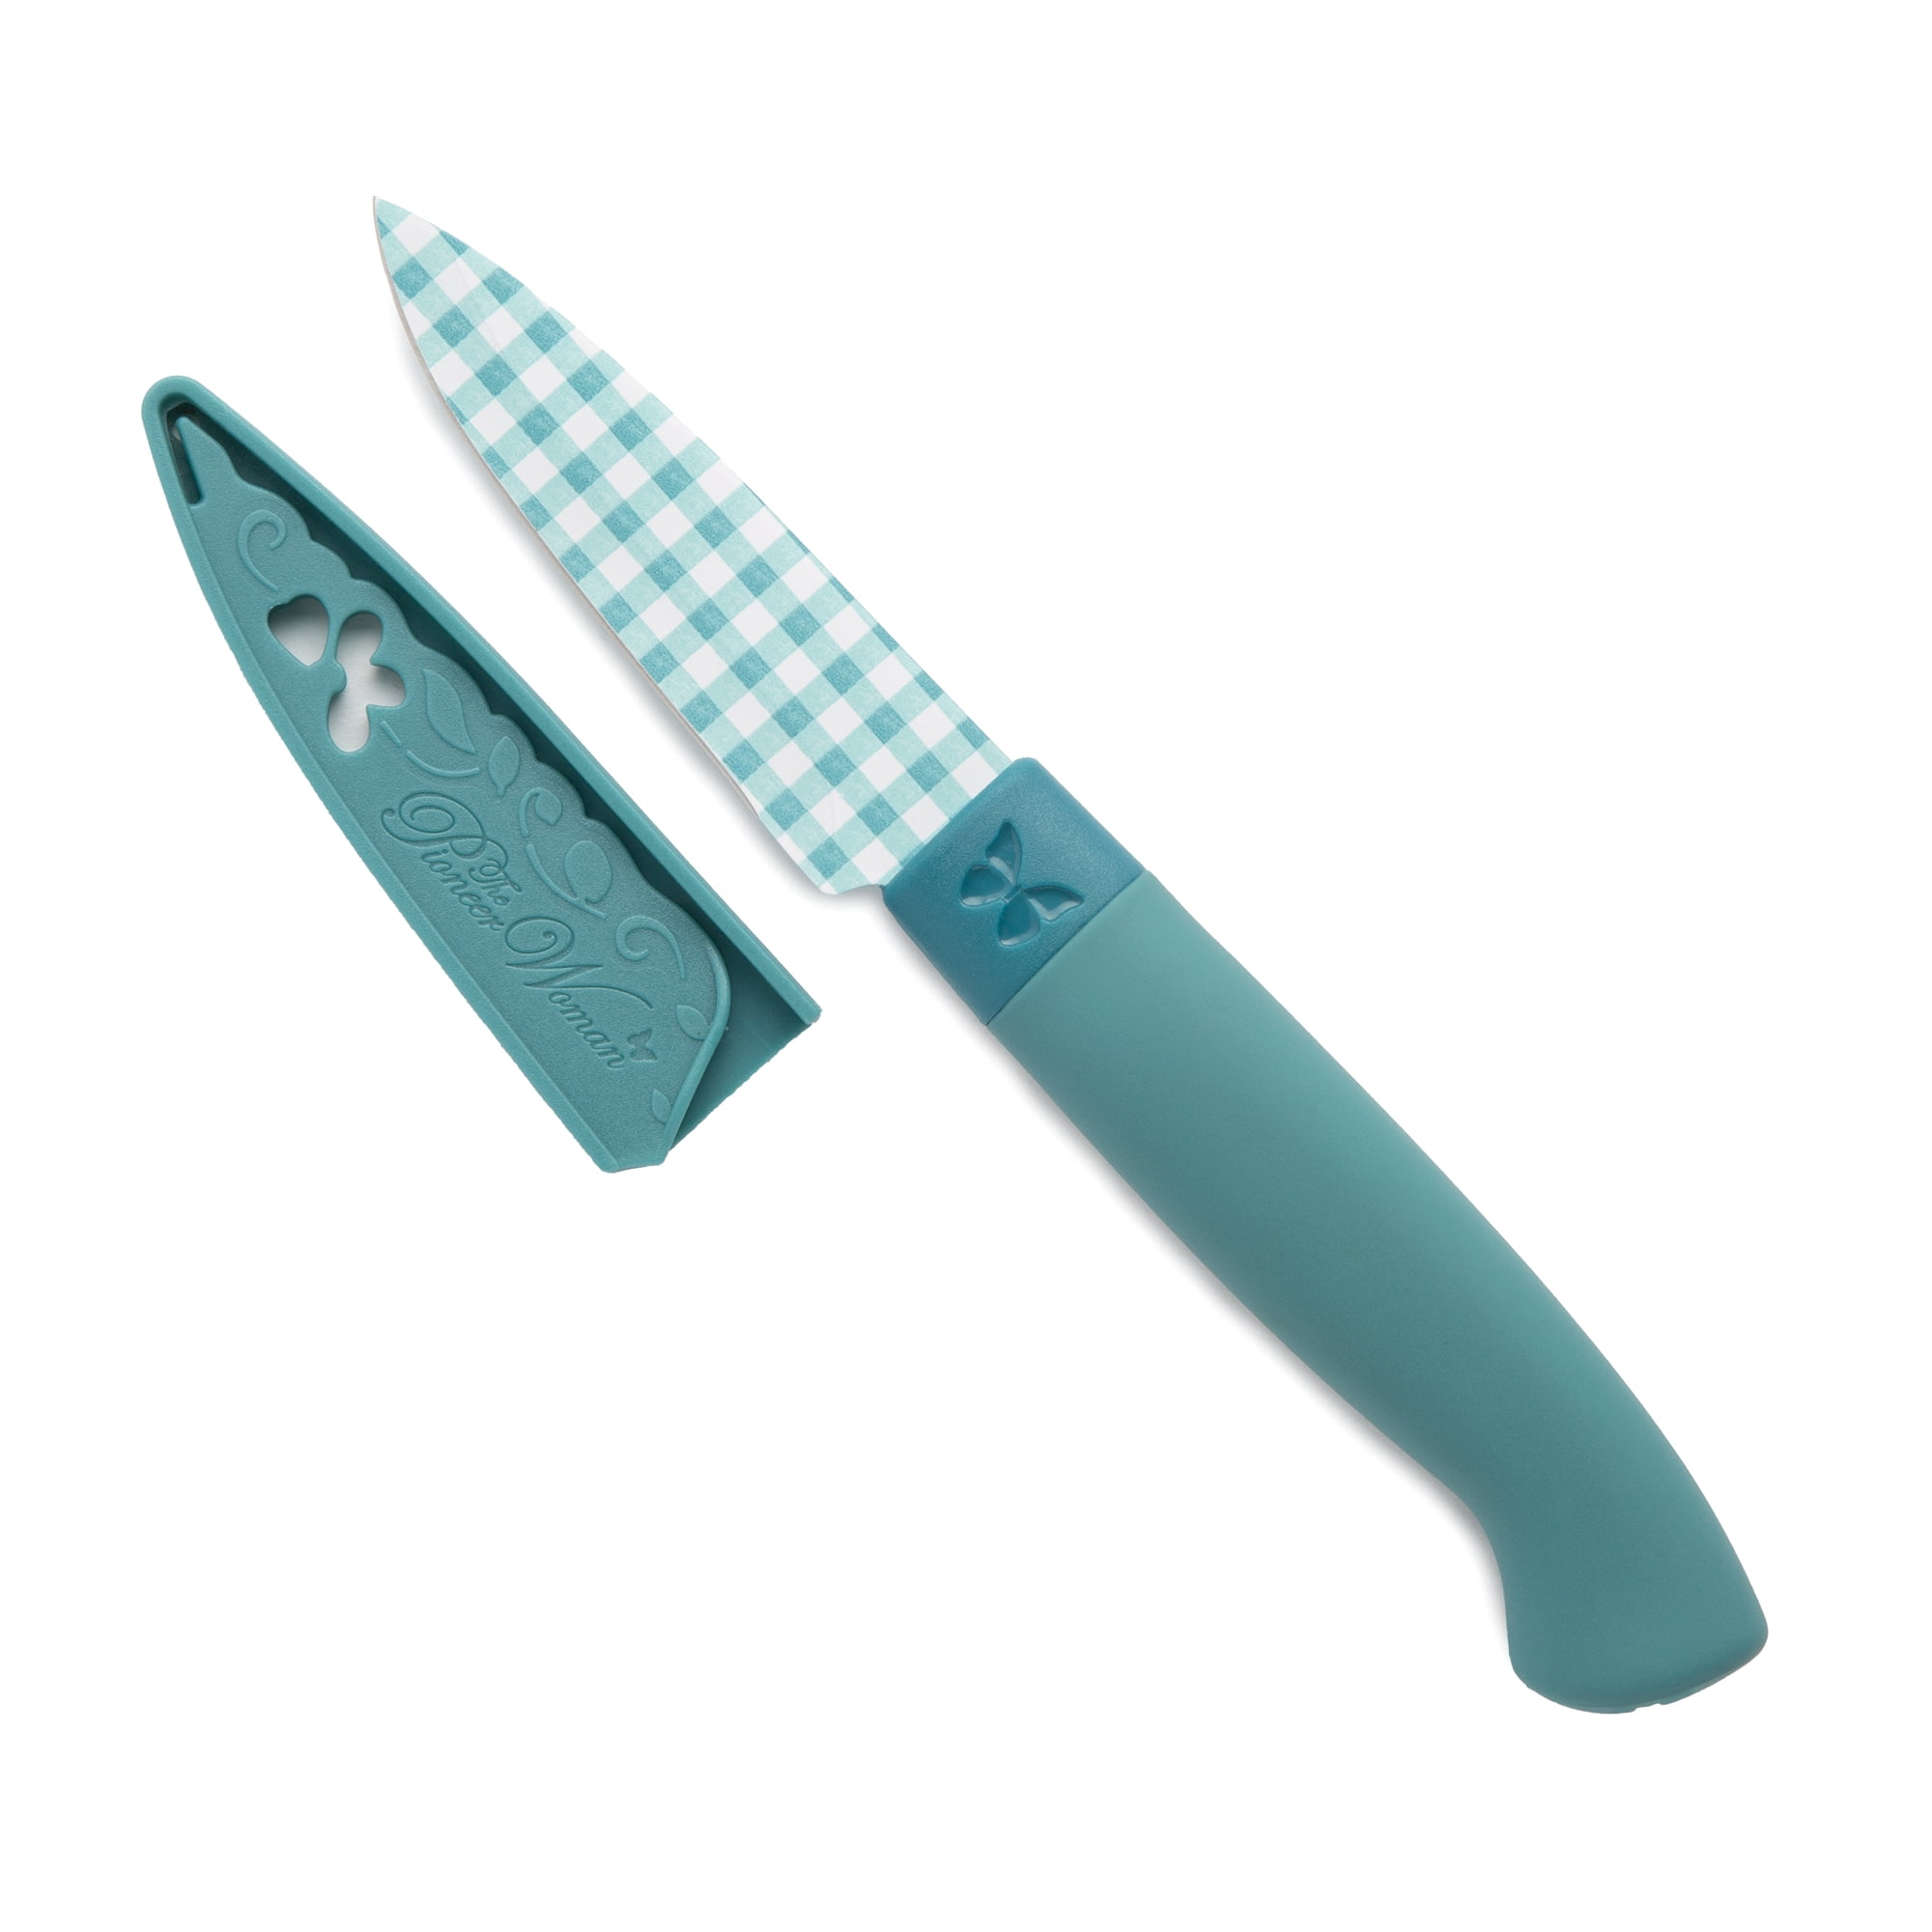 GreenLife Cutlery Stainless Steel Knife Set, 3 Piece, Turquoise, Size: 3PC